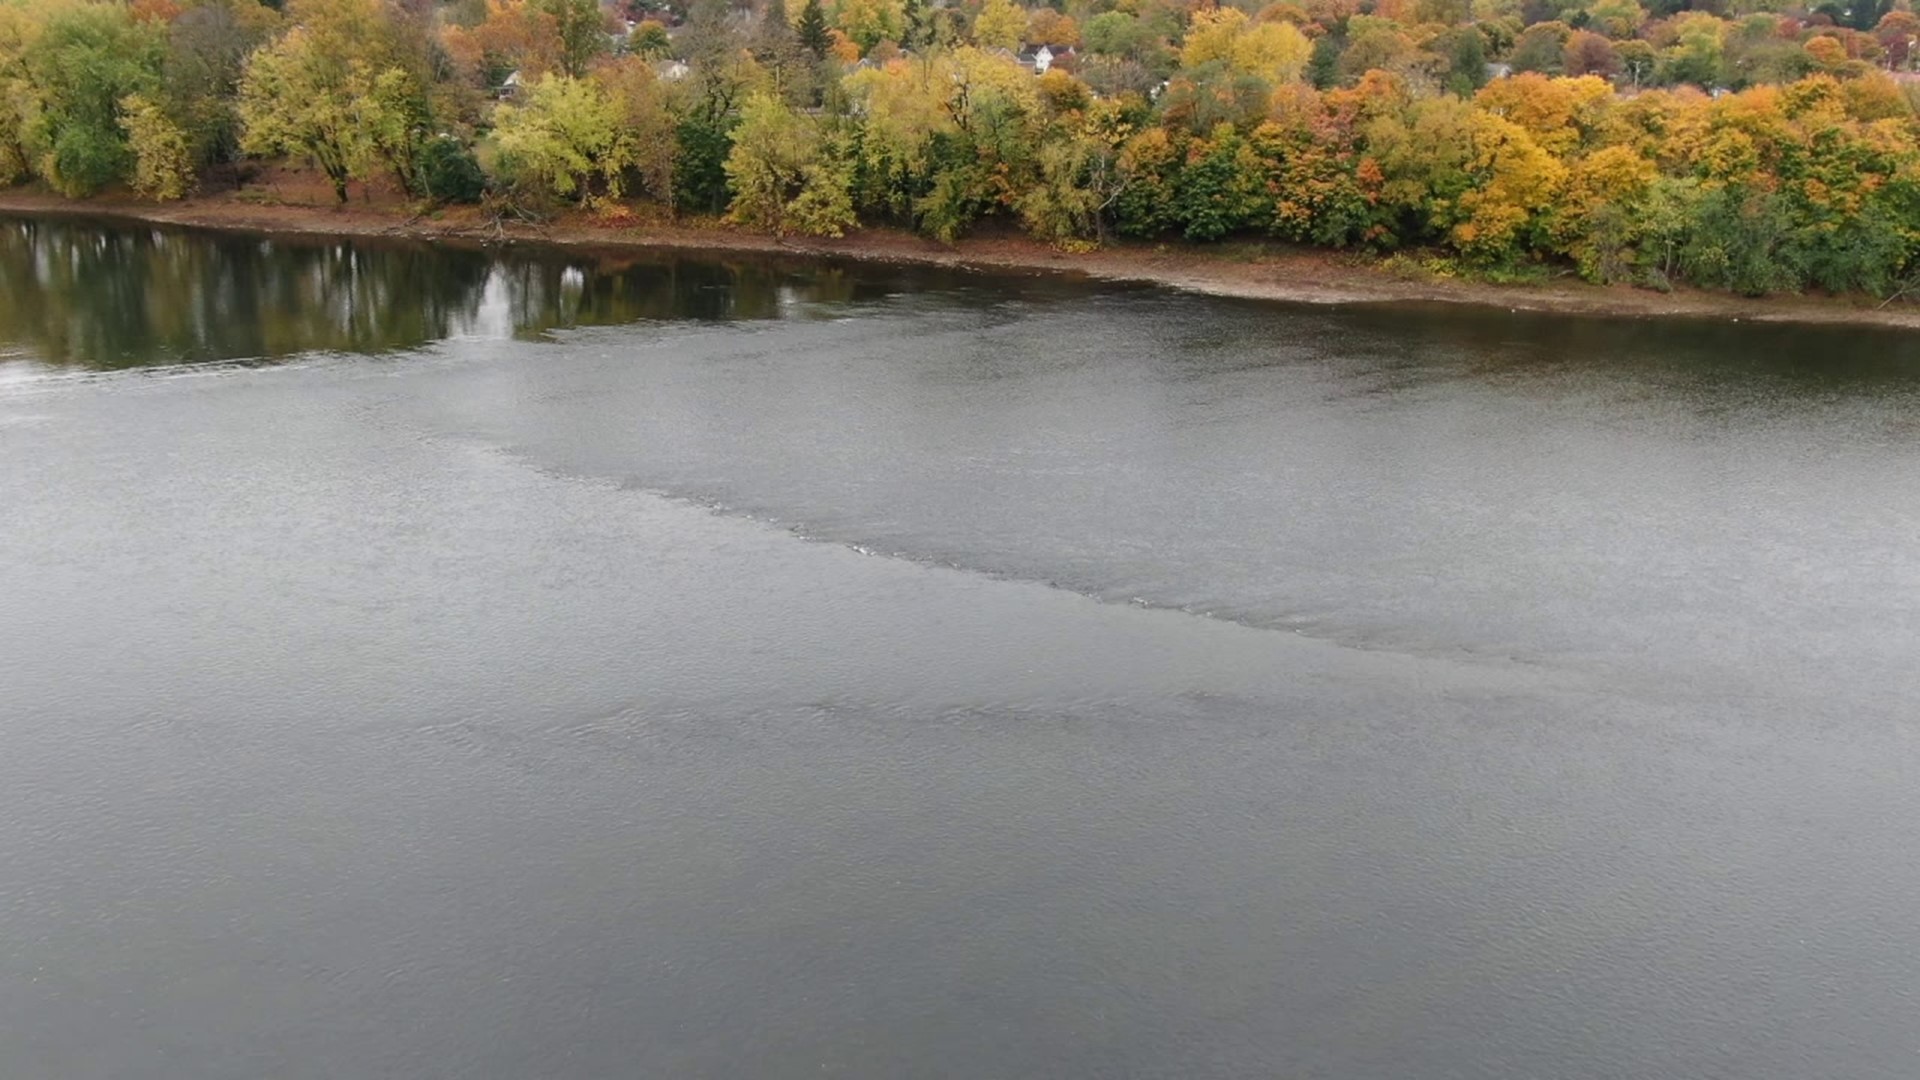 The underwater 'V' structure in the Susquehanna River is said to have been made by Native Americans, as a way to catch eels.